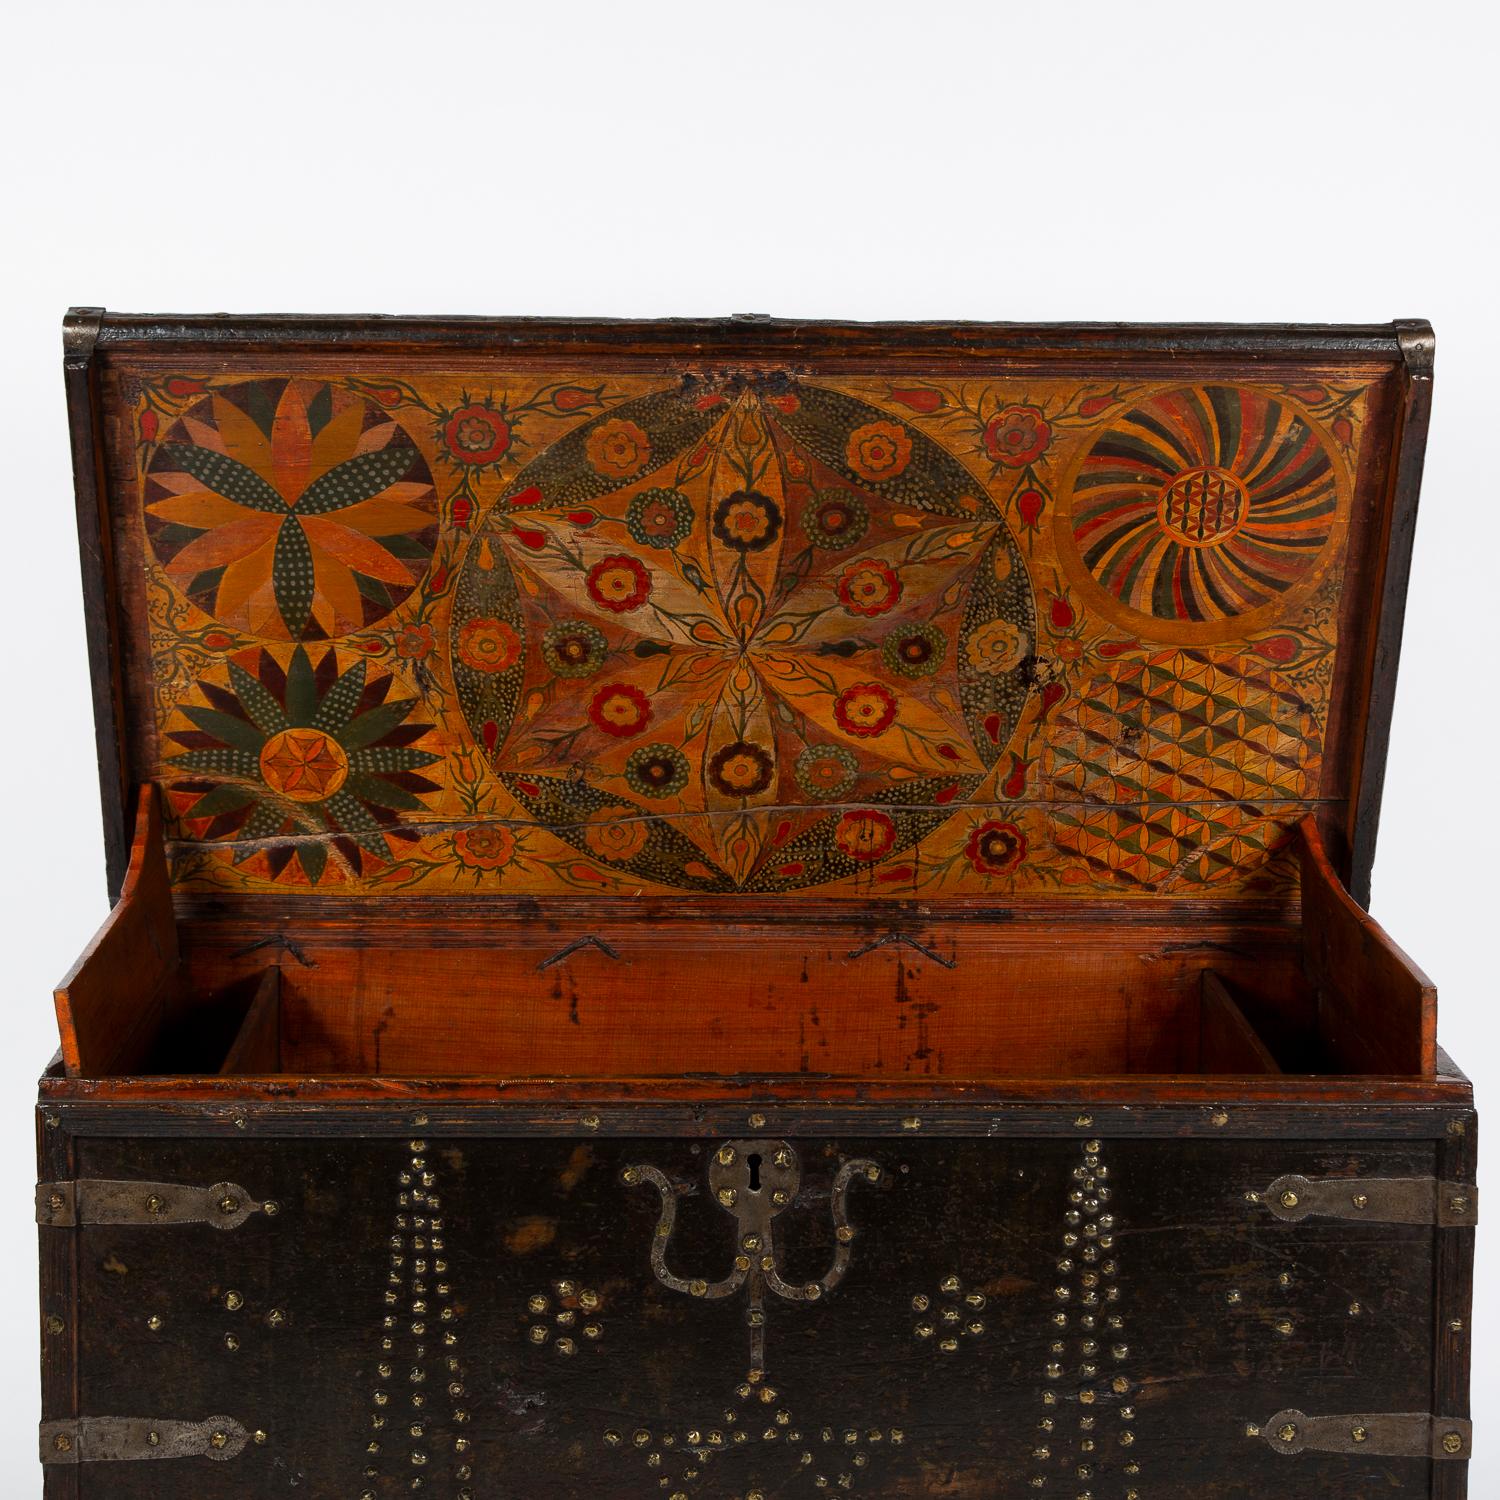 A large early 19th century Northern European painted chest, the exterior decorated with studwork and iron bindings, the interior hand painted with brightly colored floral and geometric designs.